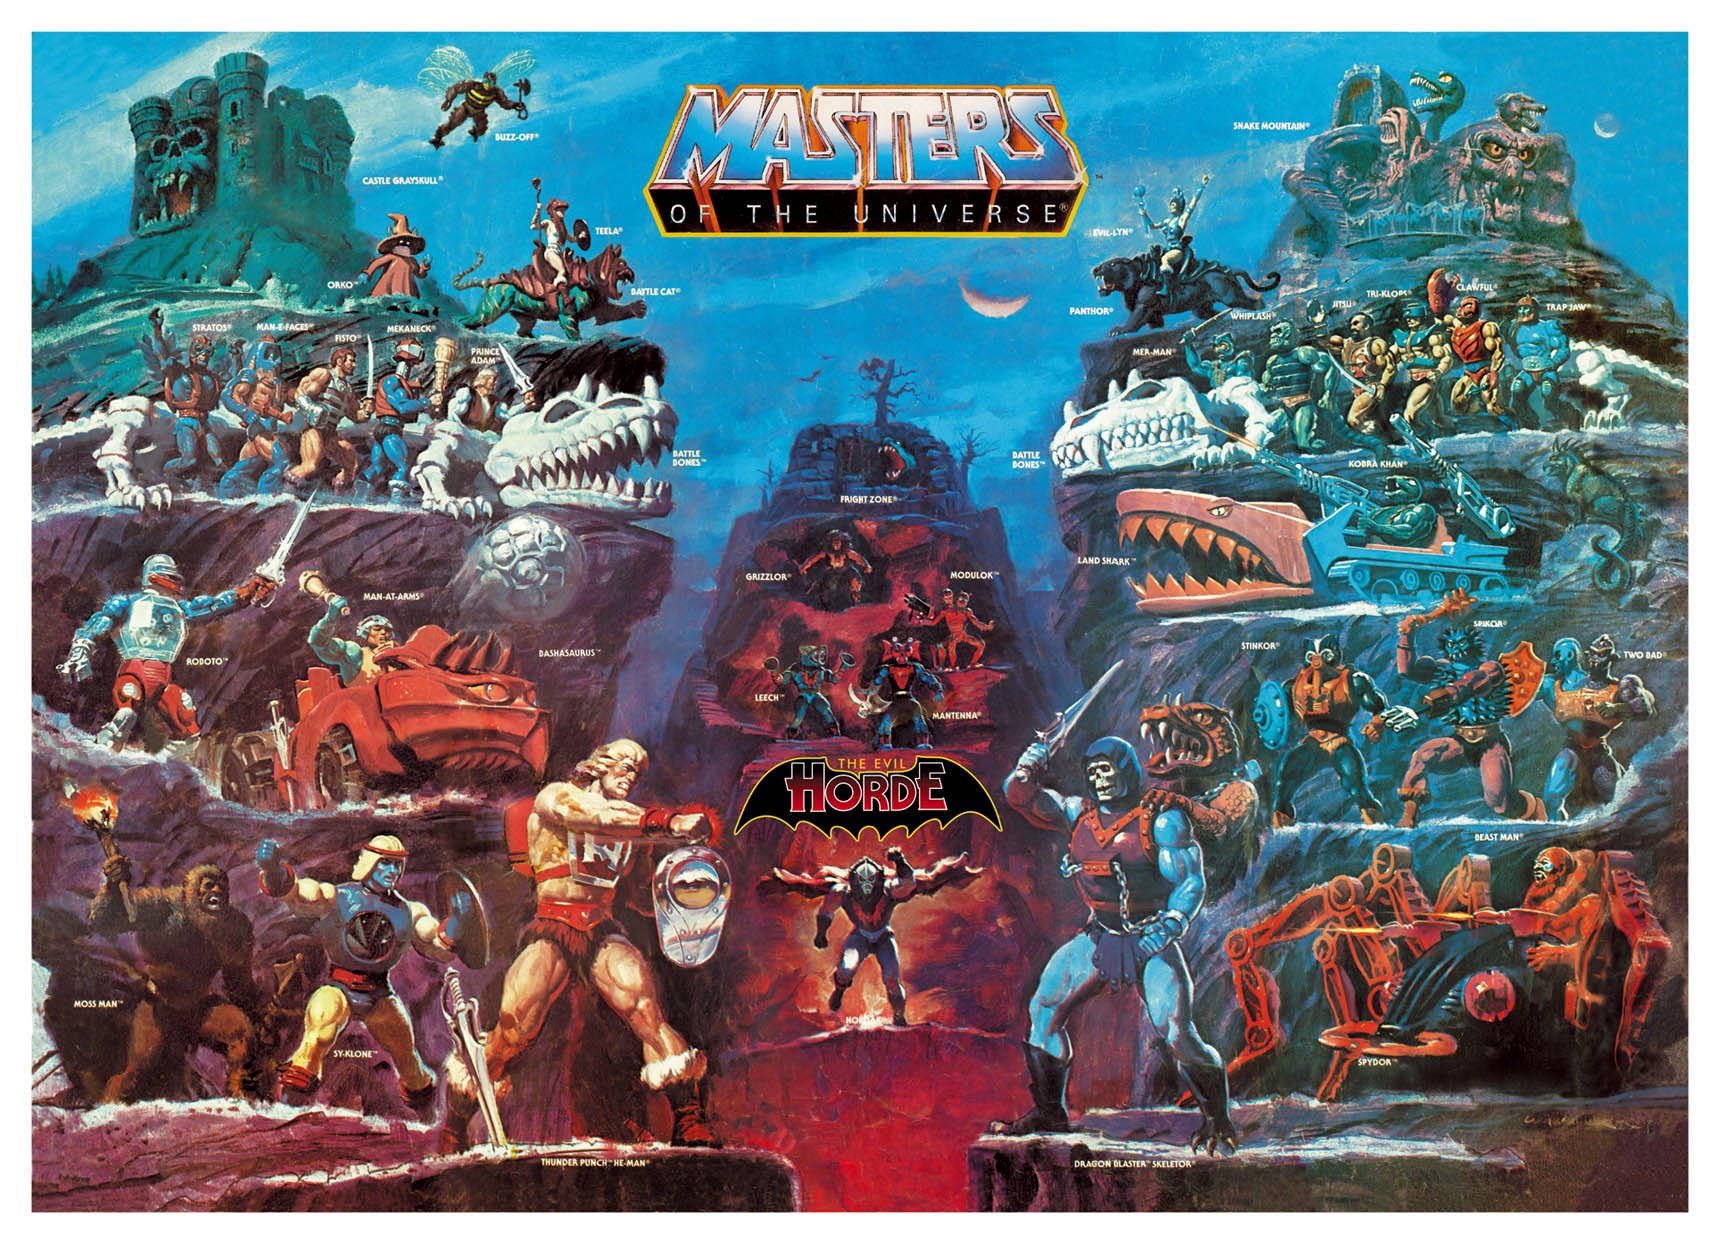 He-Man And The Masters Of The Universe Evil Horde Box Art Painting Wallpaper